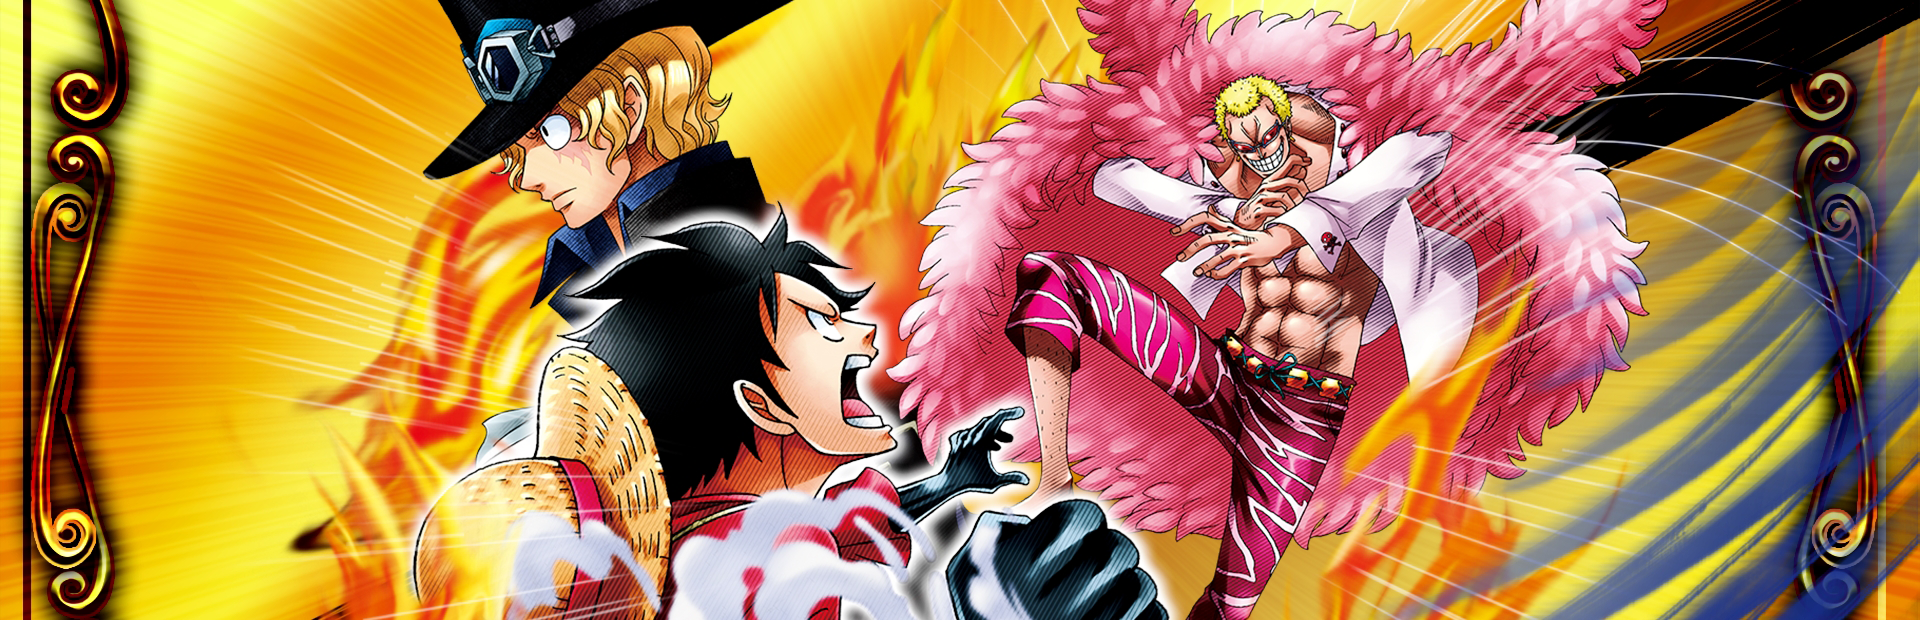 Save 90% on One Piece Burning Blood on Steam